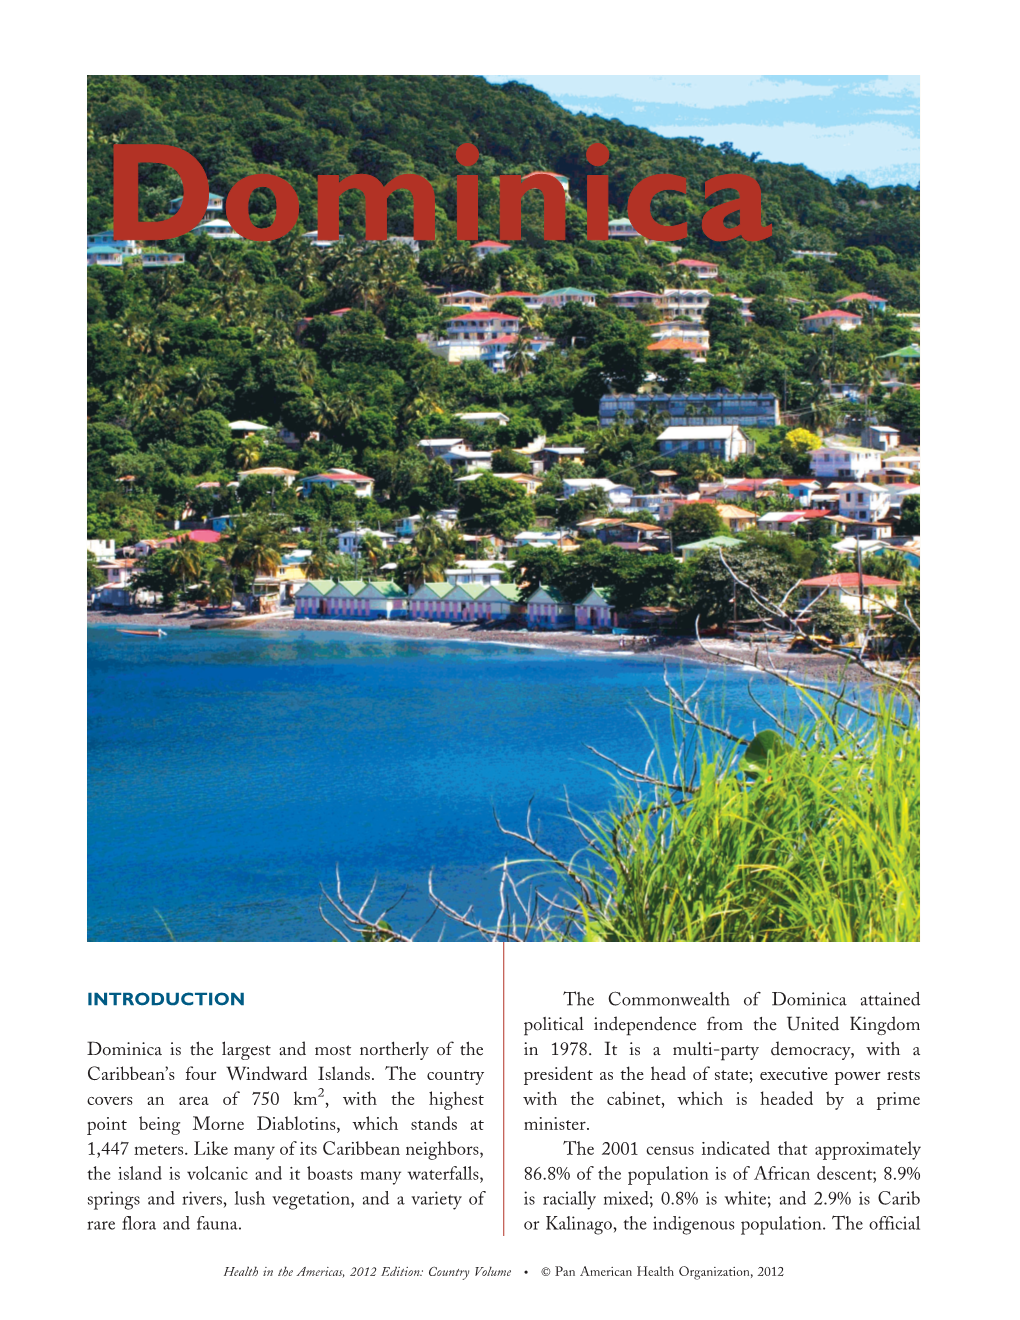 Dominica Overview